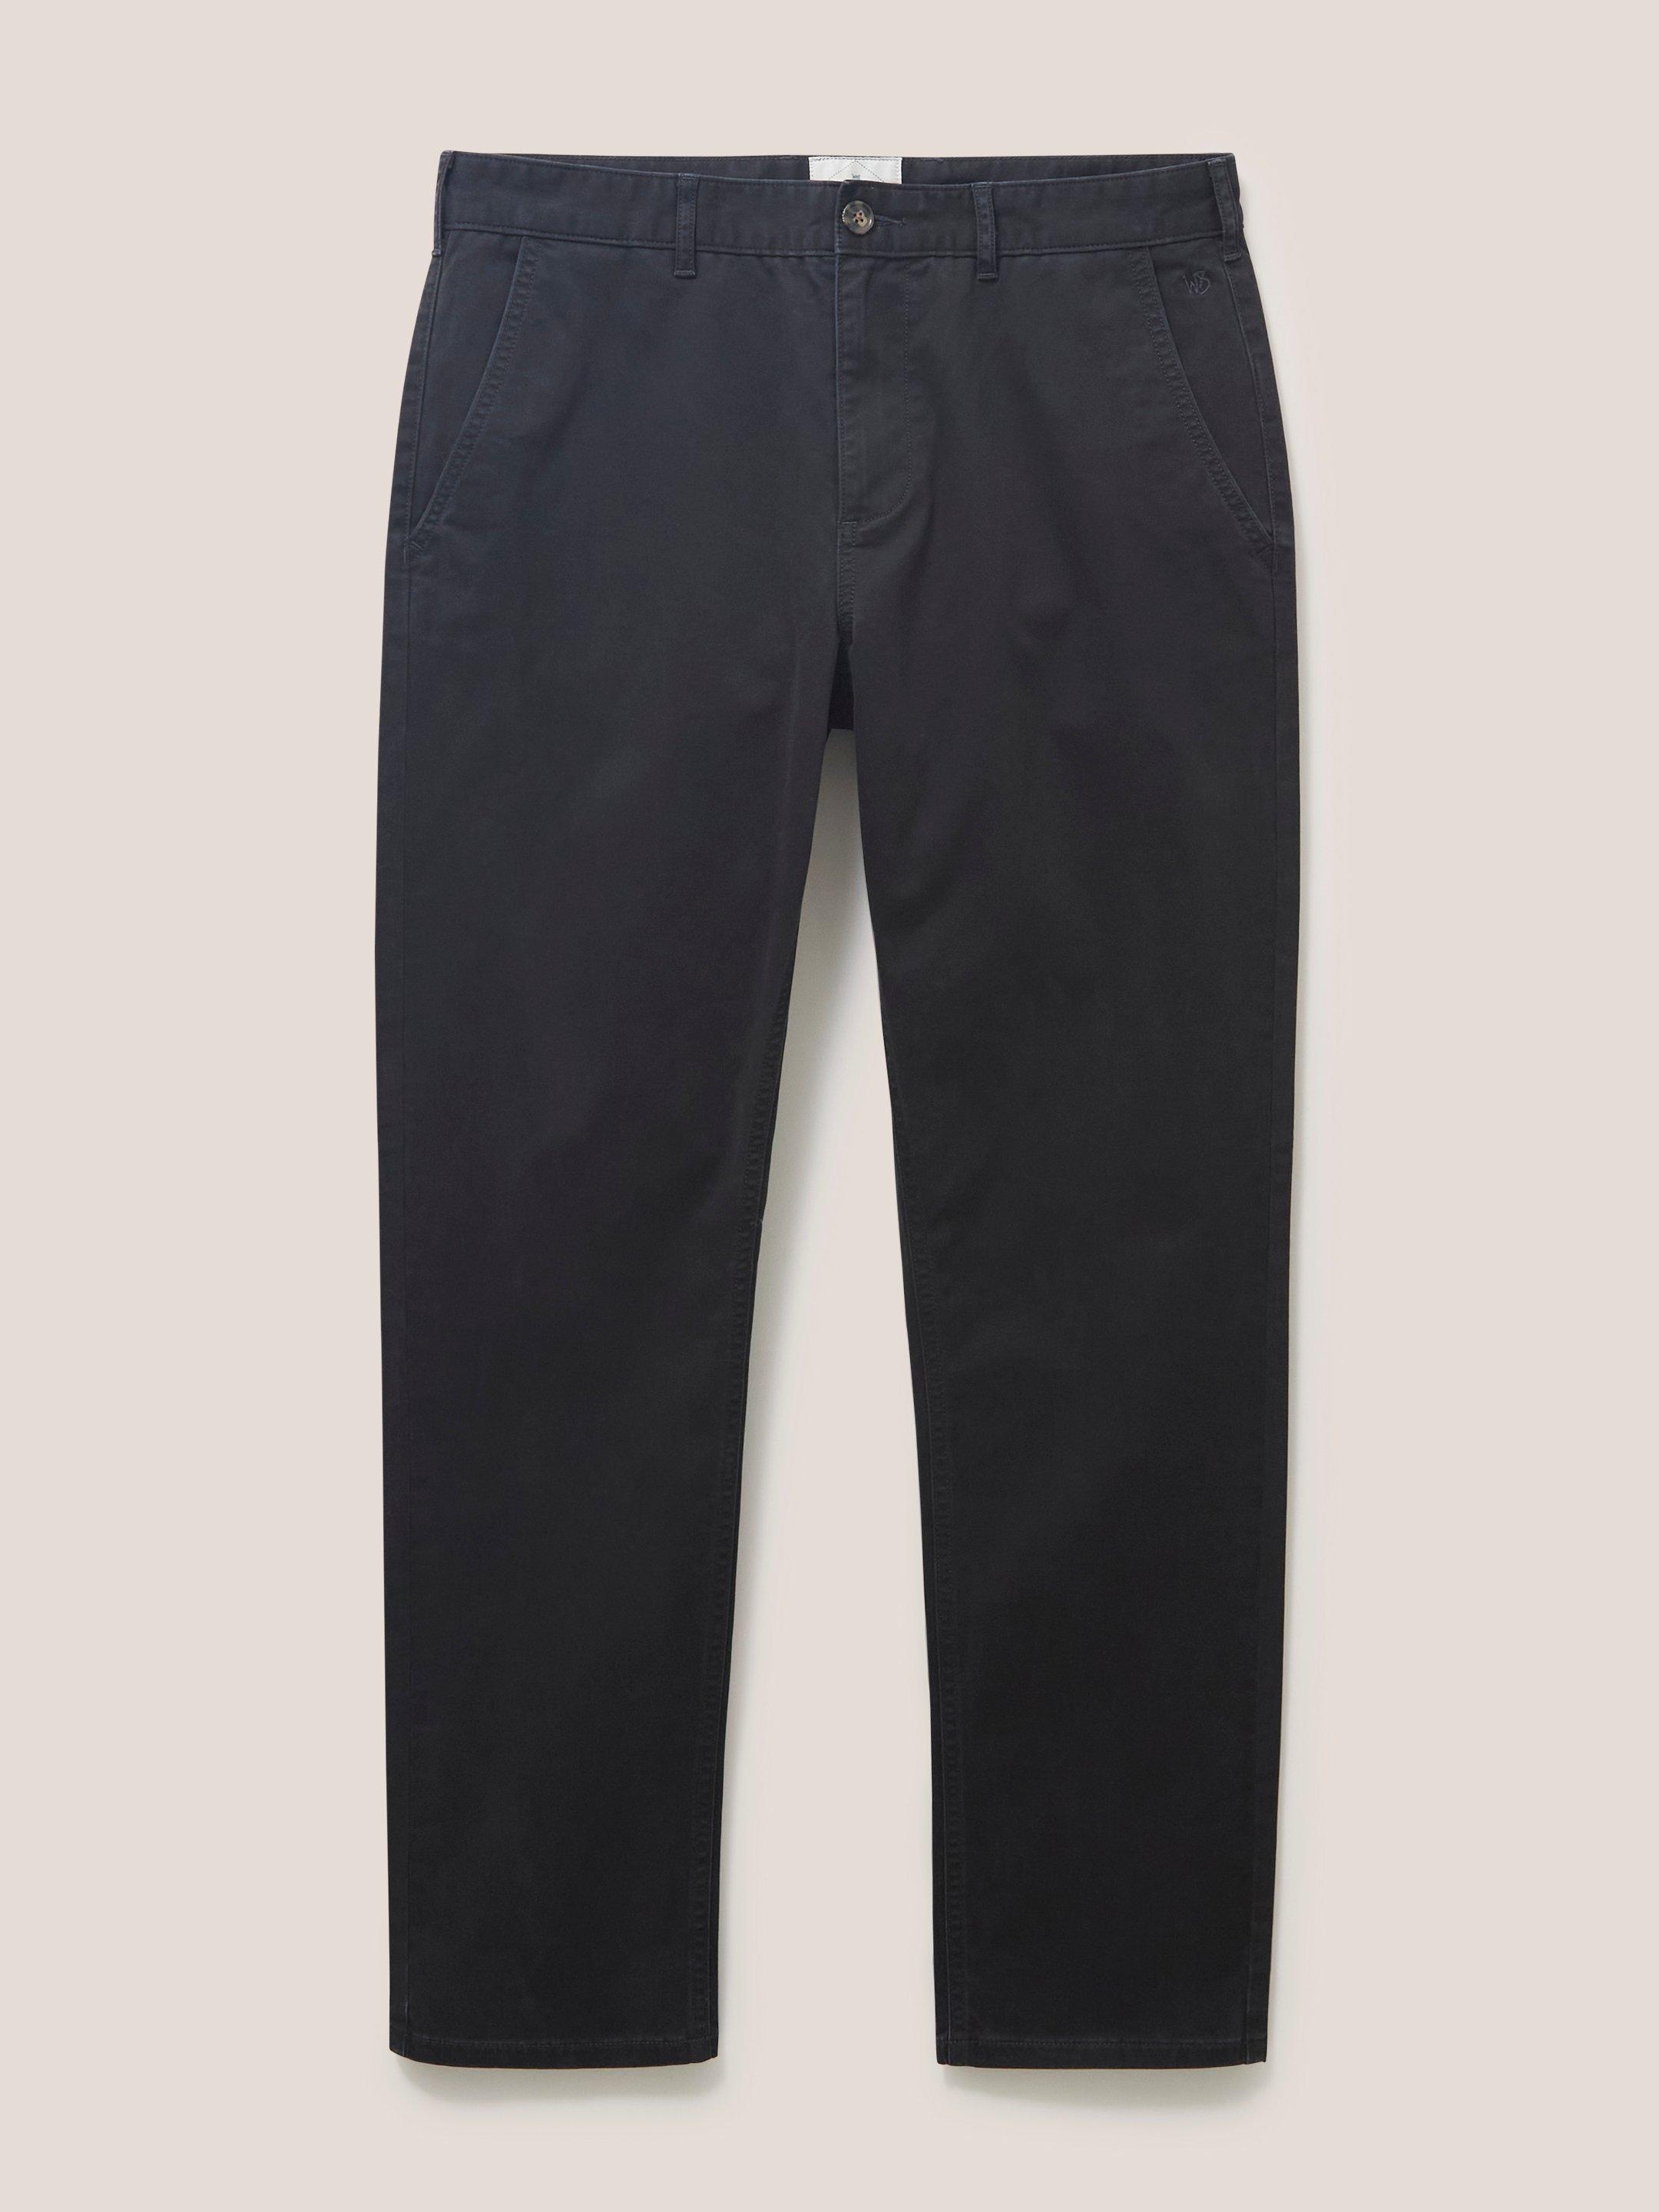 Elm Chino Trouser in PURE BLK - FLAT FRONT